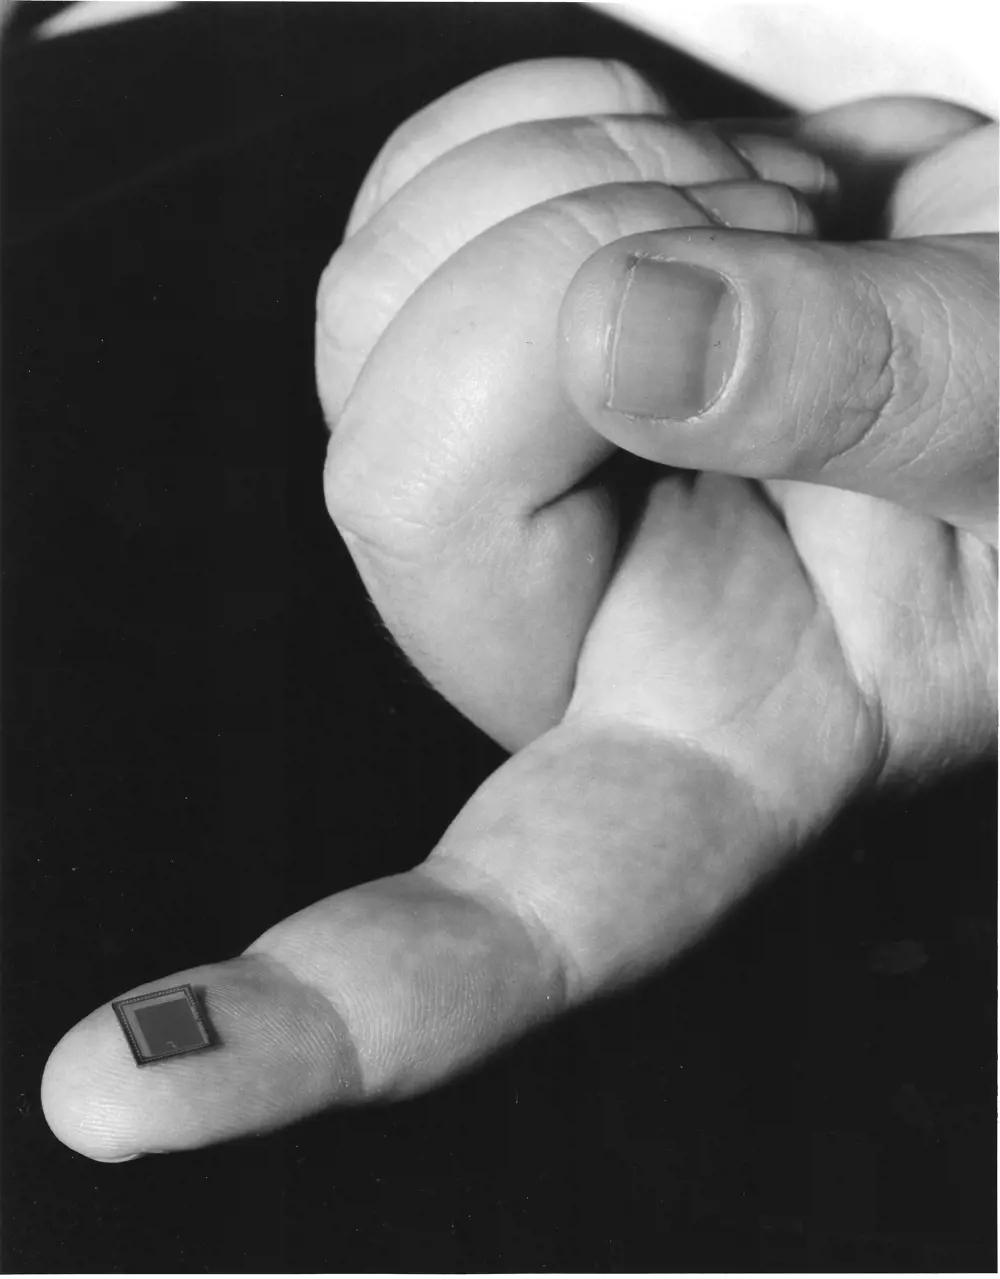 A small square camera sensor resting on someone's fingertip in greyscale.